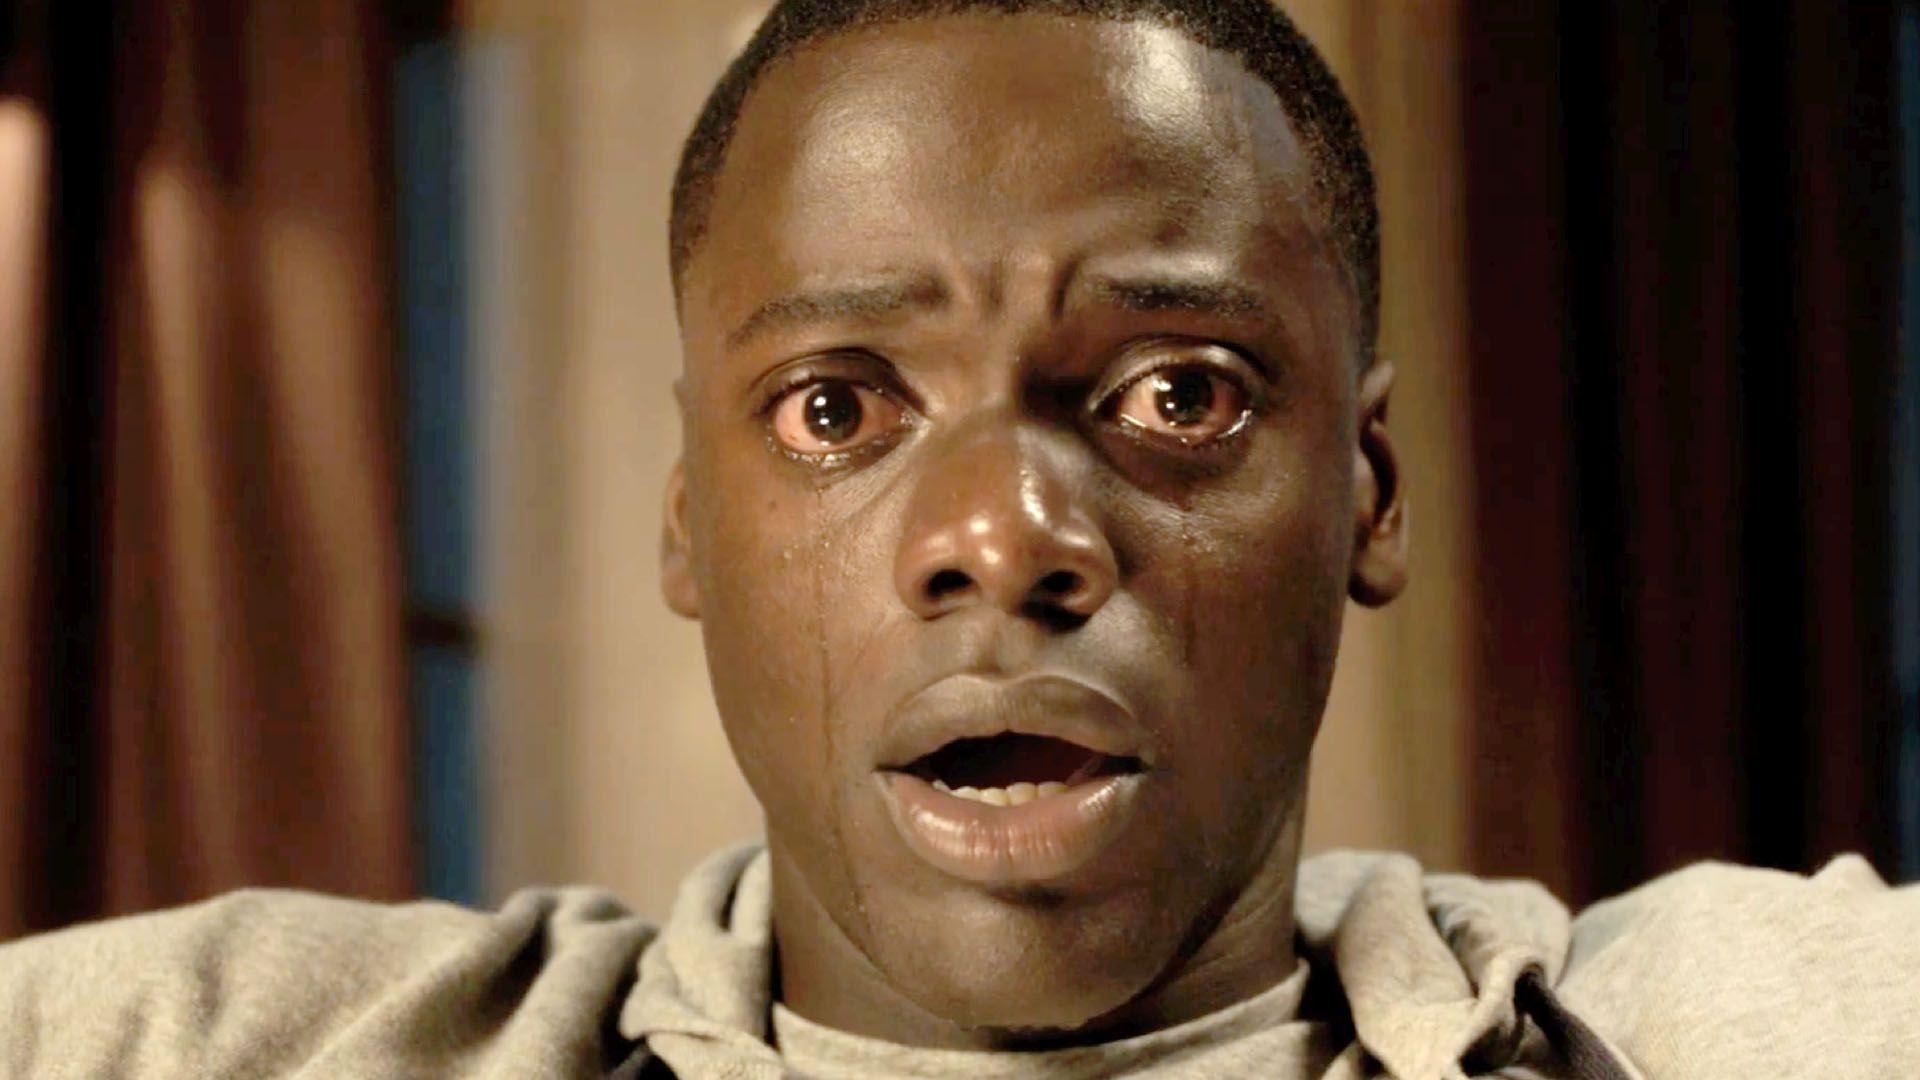 Get Out (2017) Movie Photo and Stills